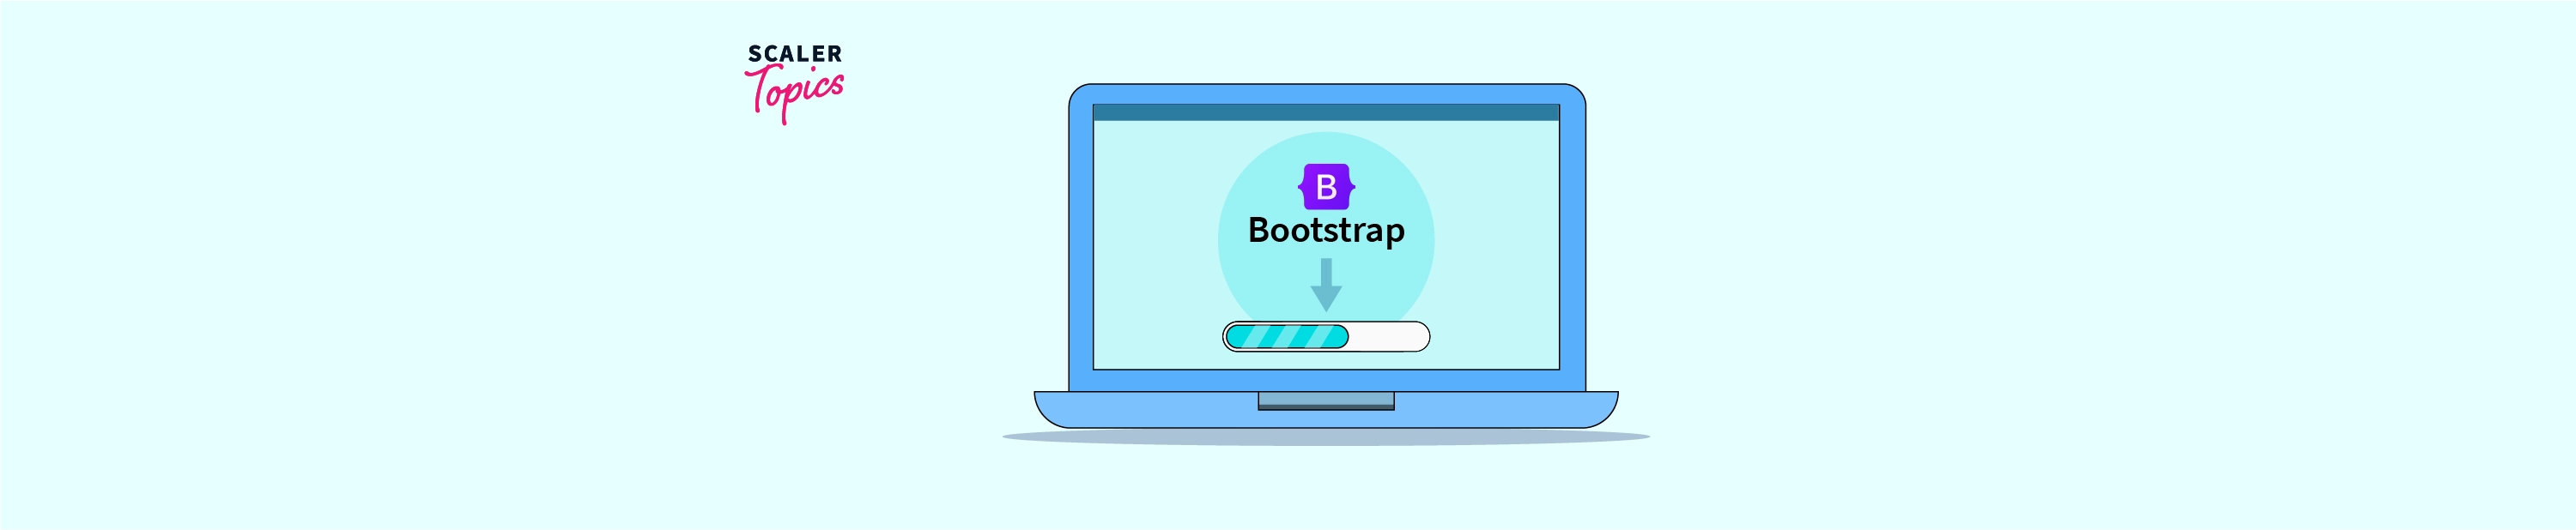 Install Bootstrap Scaler Topics